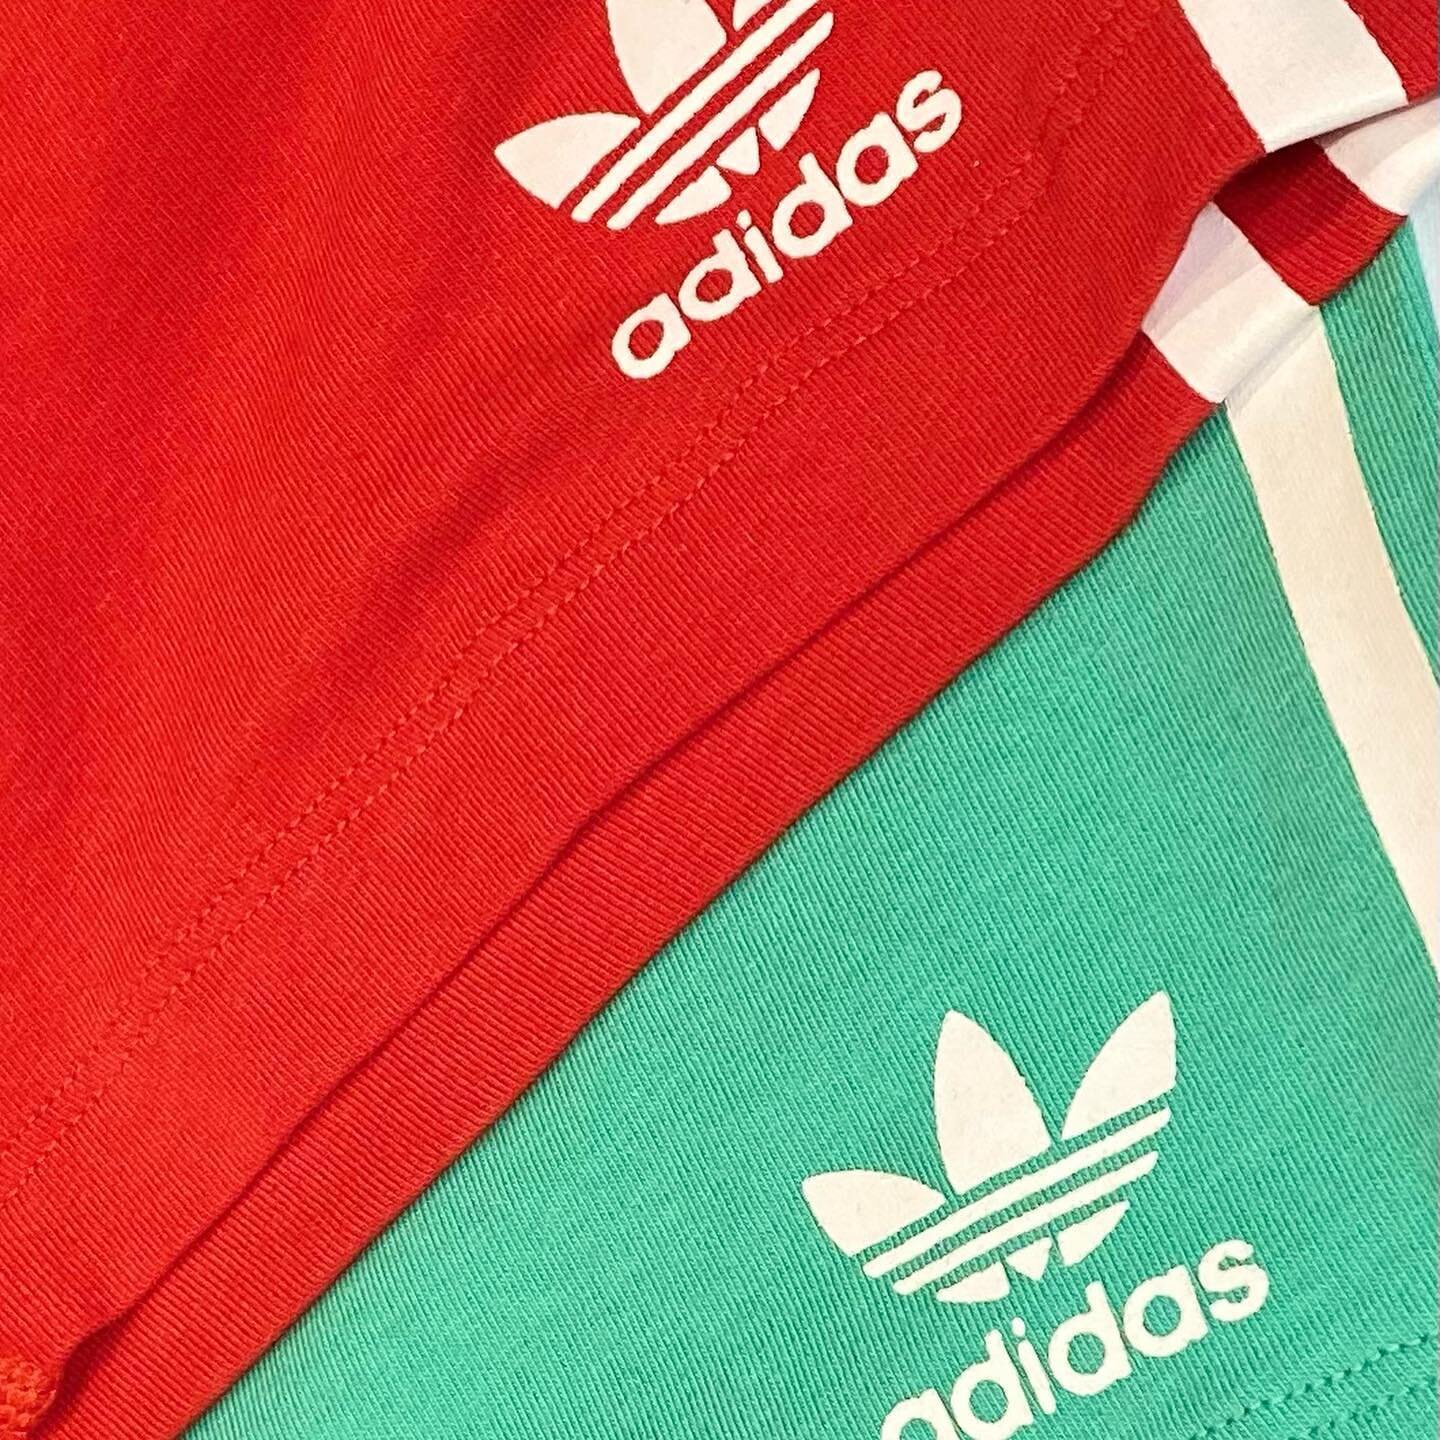 🦋Adidas🦋 

Adidas is a brand that is known for its original, unique and comfortable sportswear turned casual tracksuits. From their ready to wear collections including shoes, accessories and clothing to their sports collections and many collaborati